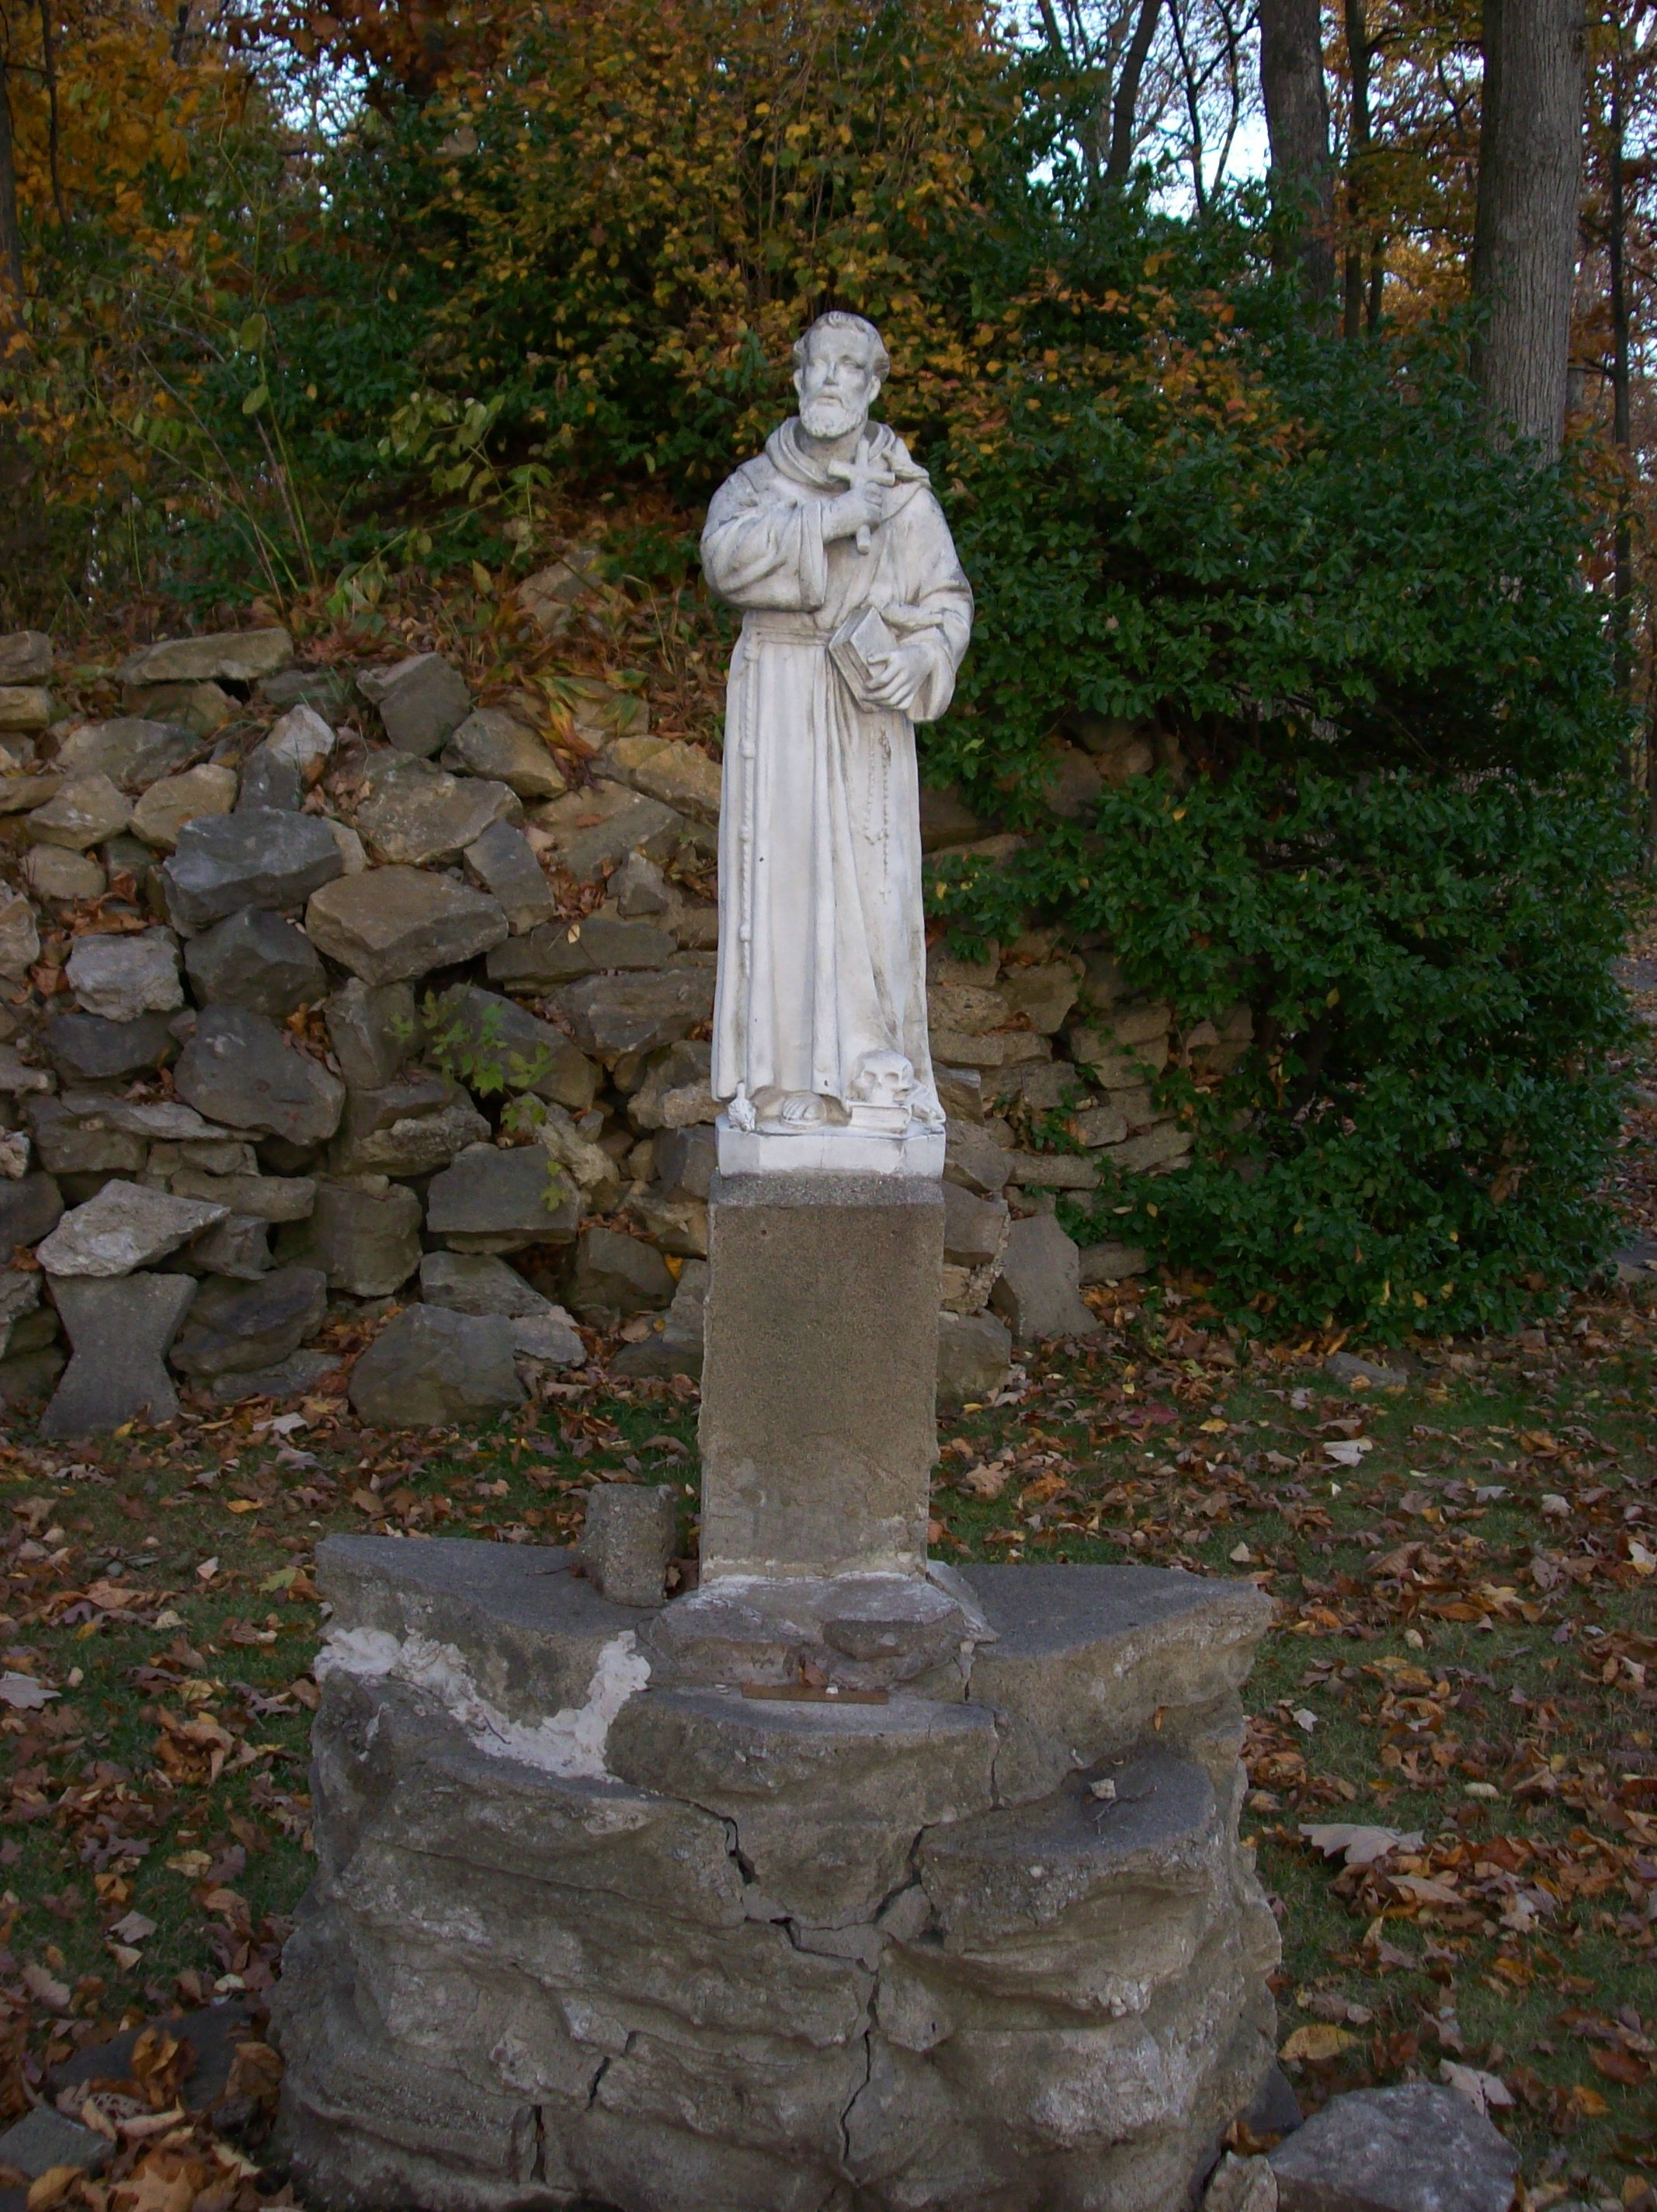 Located behind the Grotto